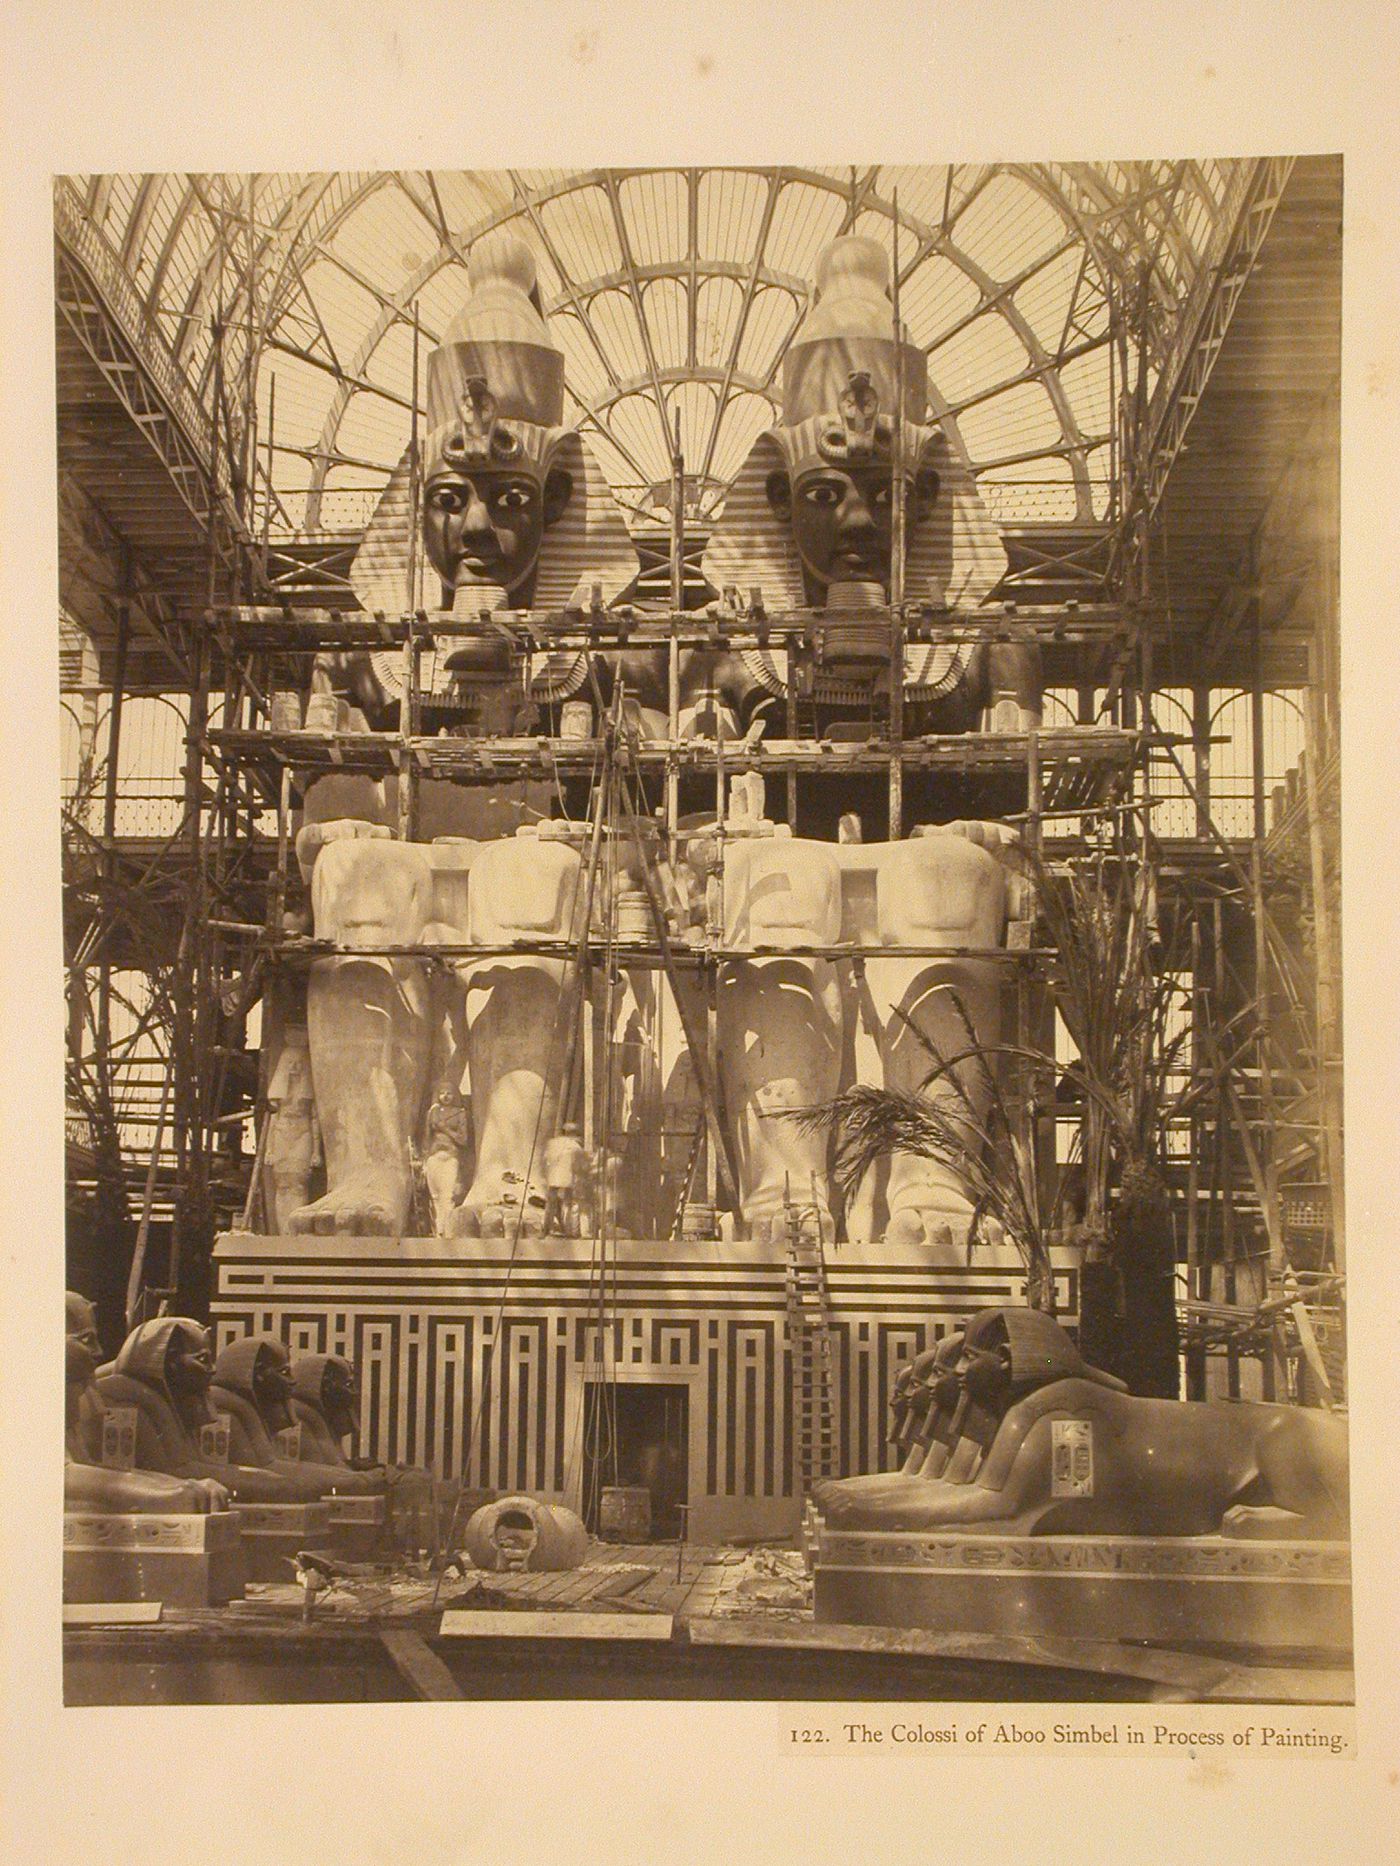 The Colossi of Aboo Simbel in process of painting, Crystal Palace, Sydenham, England